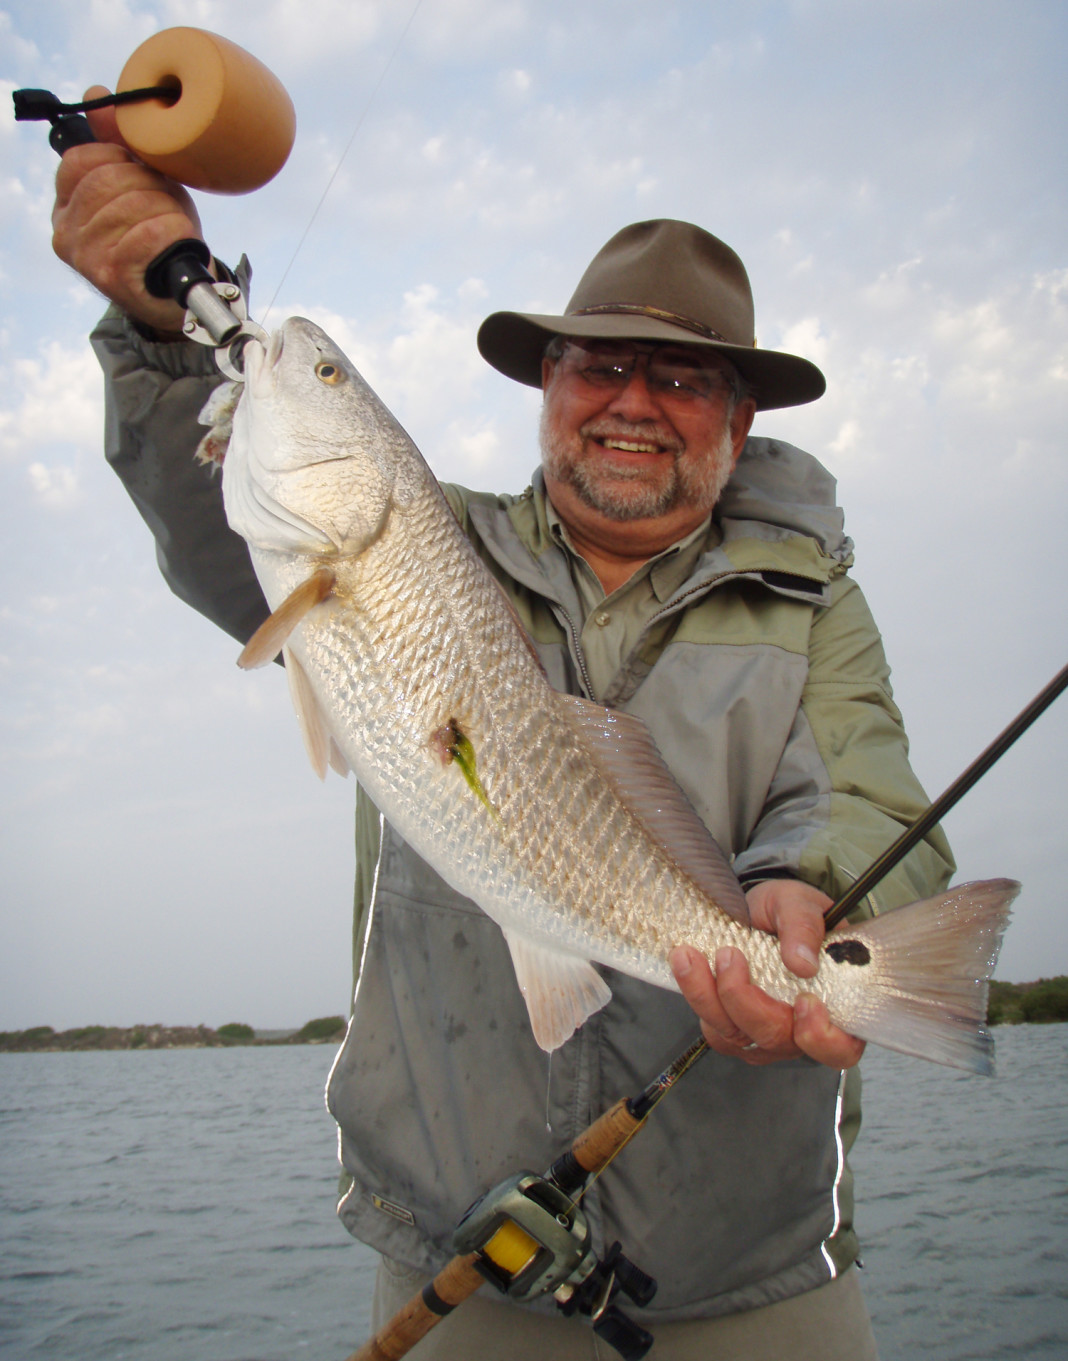 Texas fishing calendar In October head to Gulf beaches for redfish